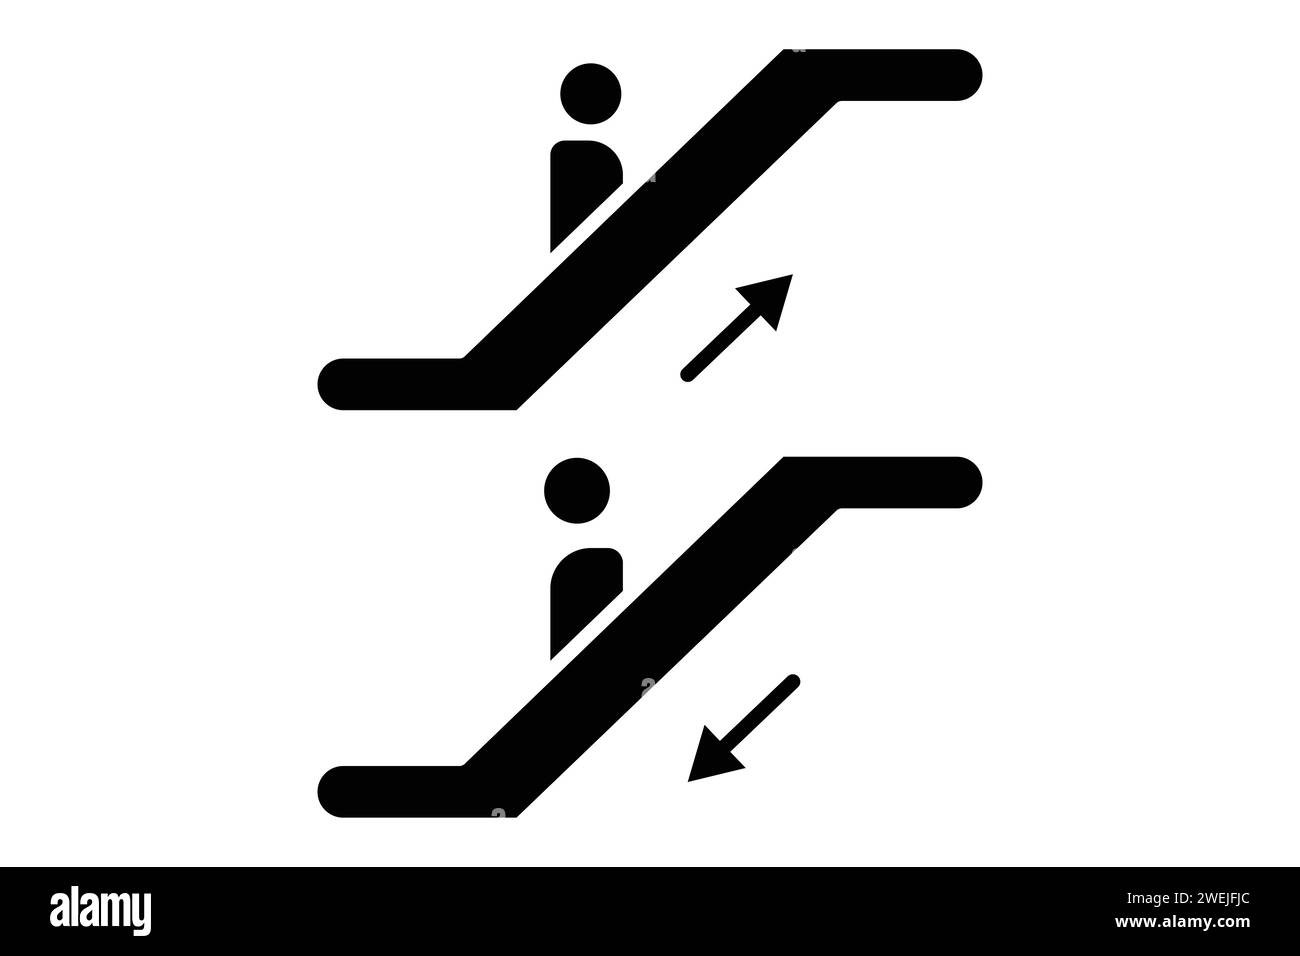 escalator icon. icon related to indoor navigation in public spaces. solid icon style. element illustration Stock Vector